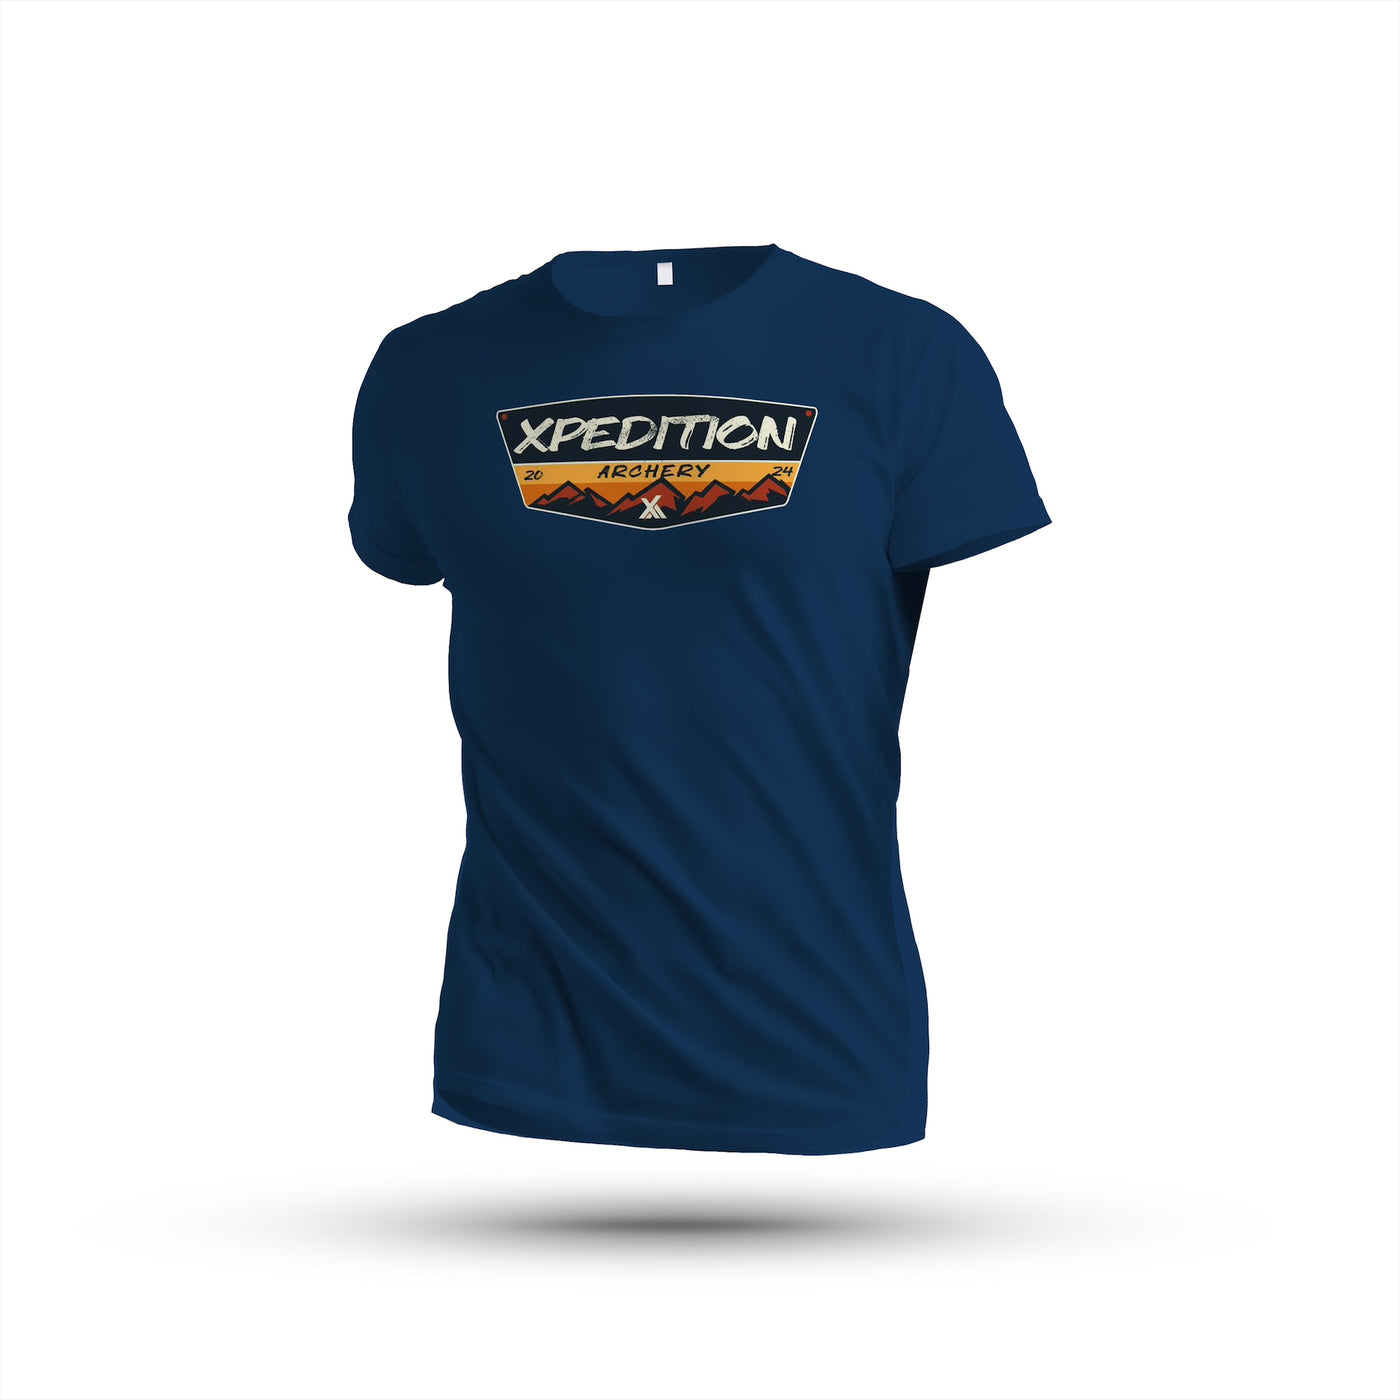 Xpedition Archery Topo Tee